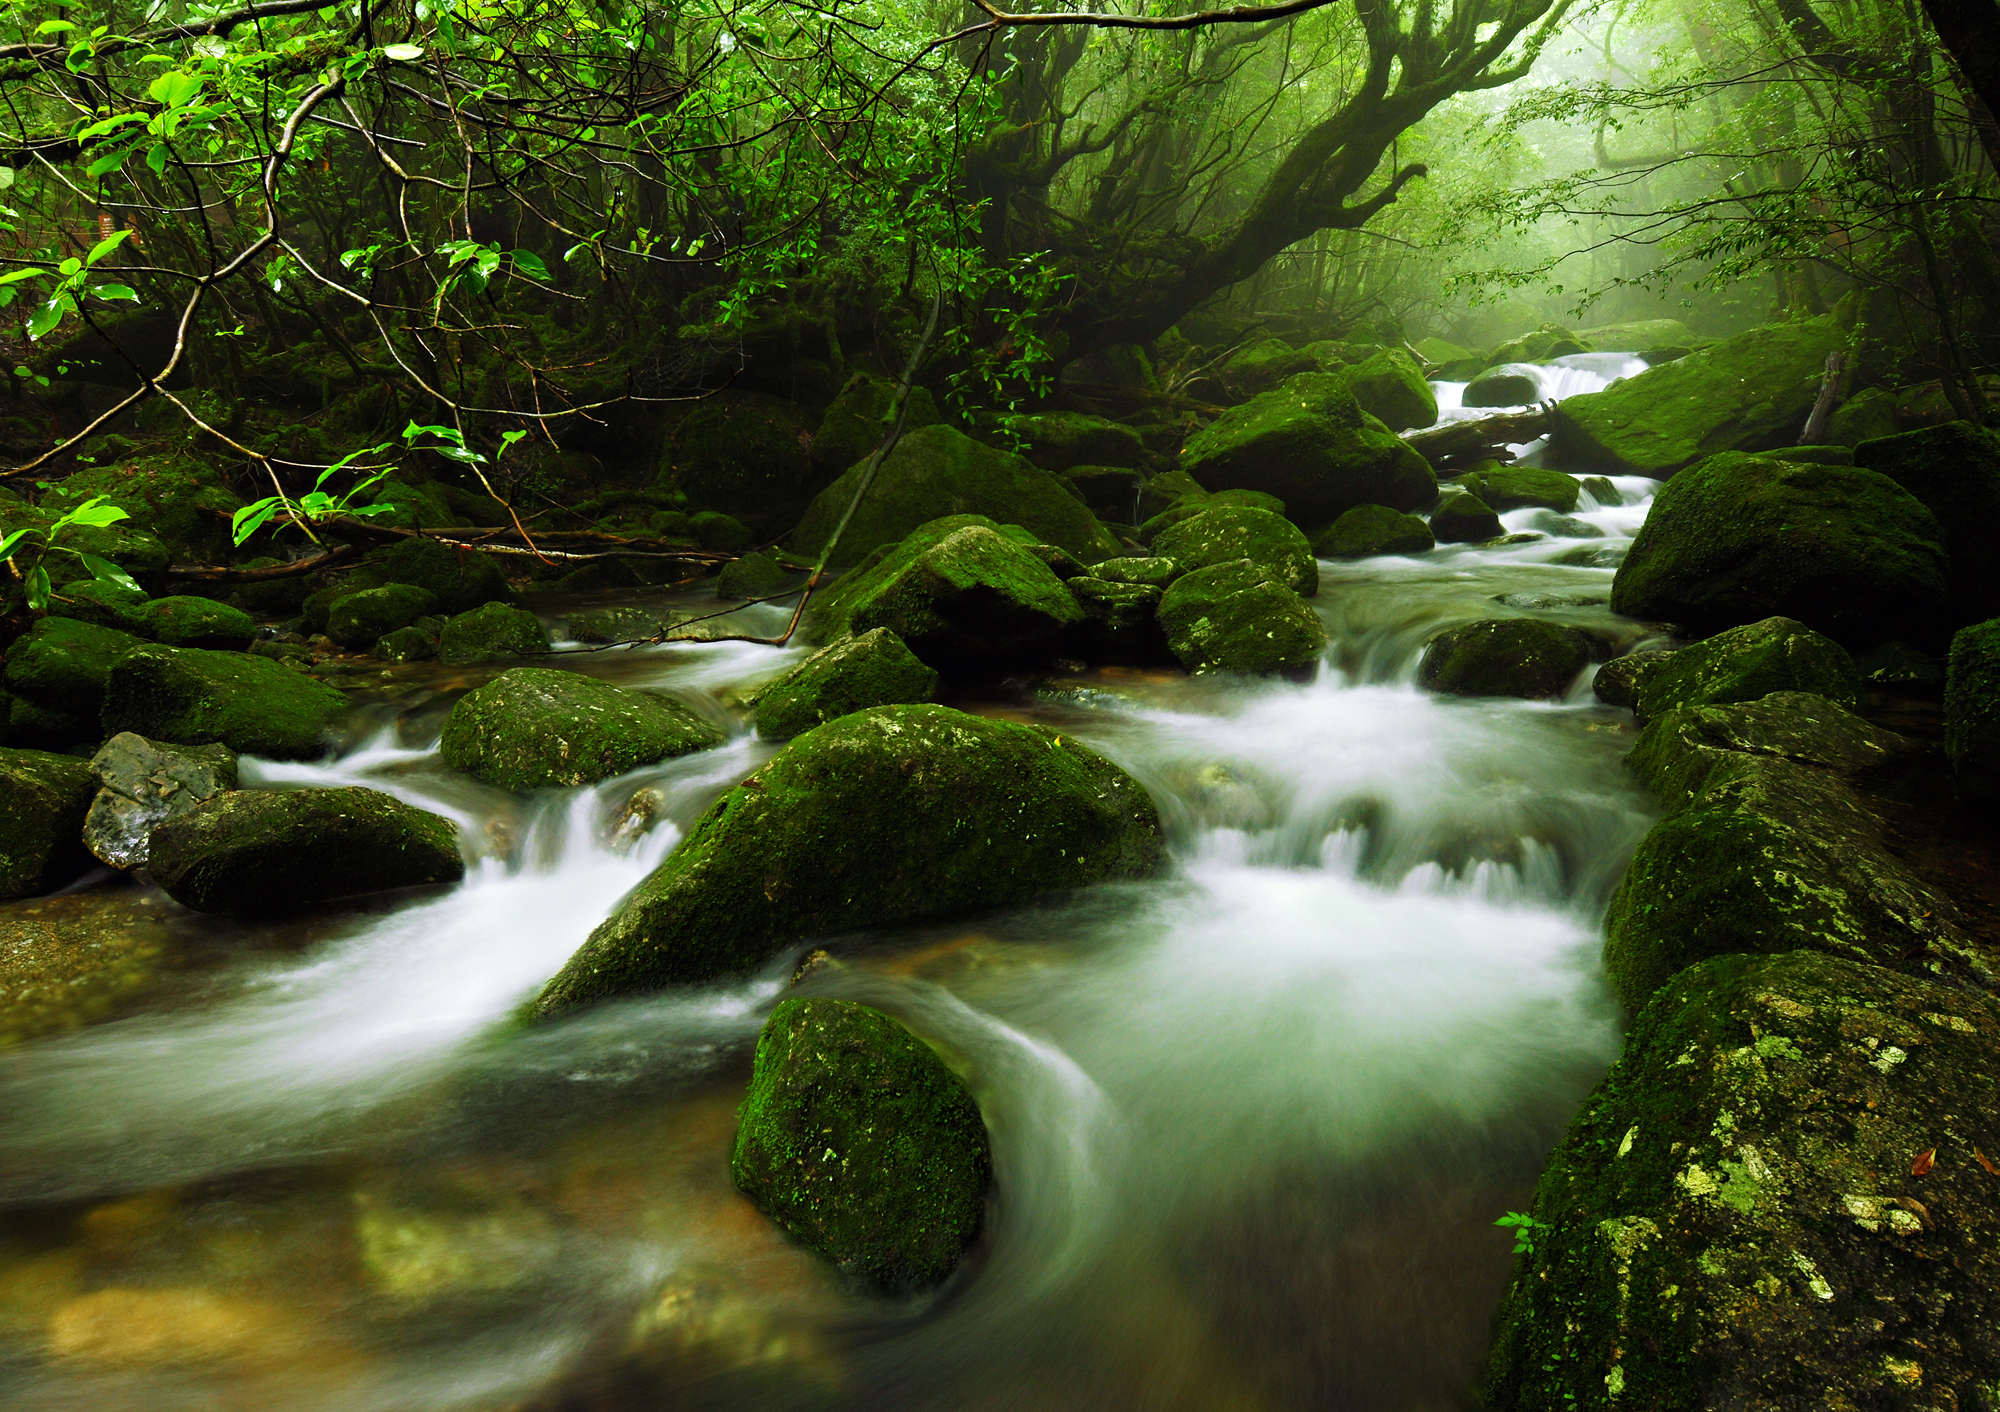 Yakushima A Unesco Forest Covered In Moss Ancient Trees Mystical And Secluded